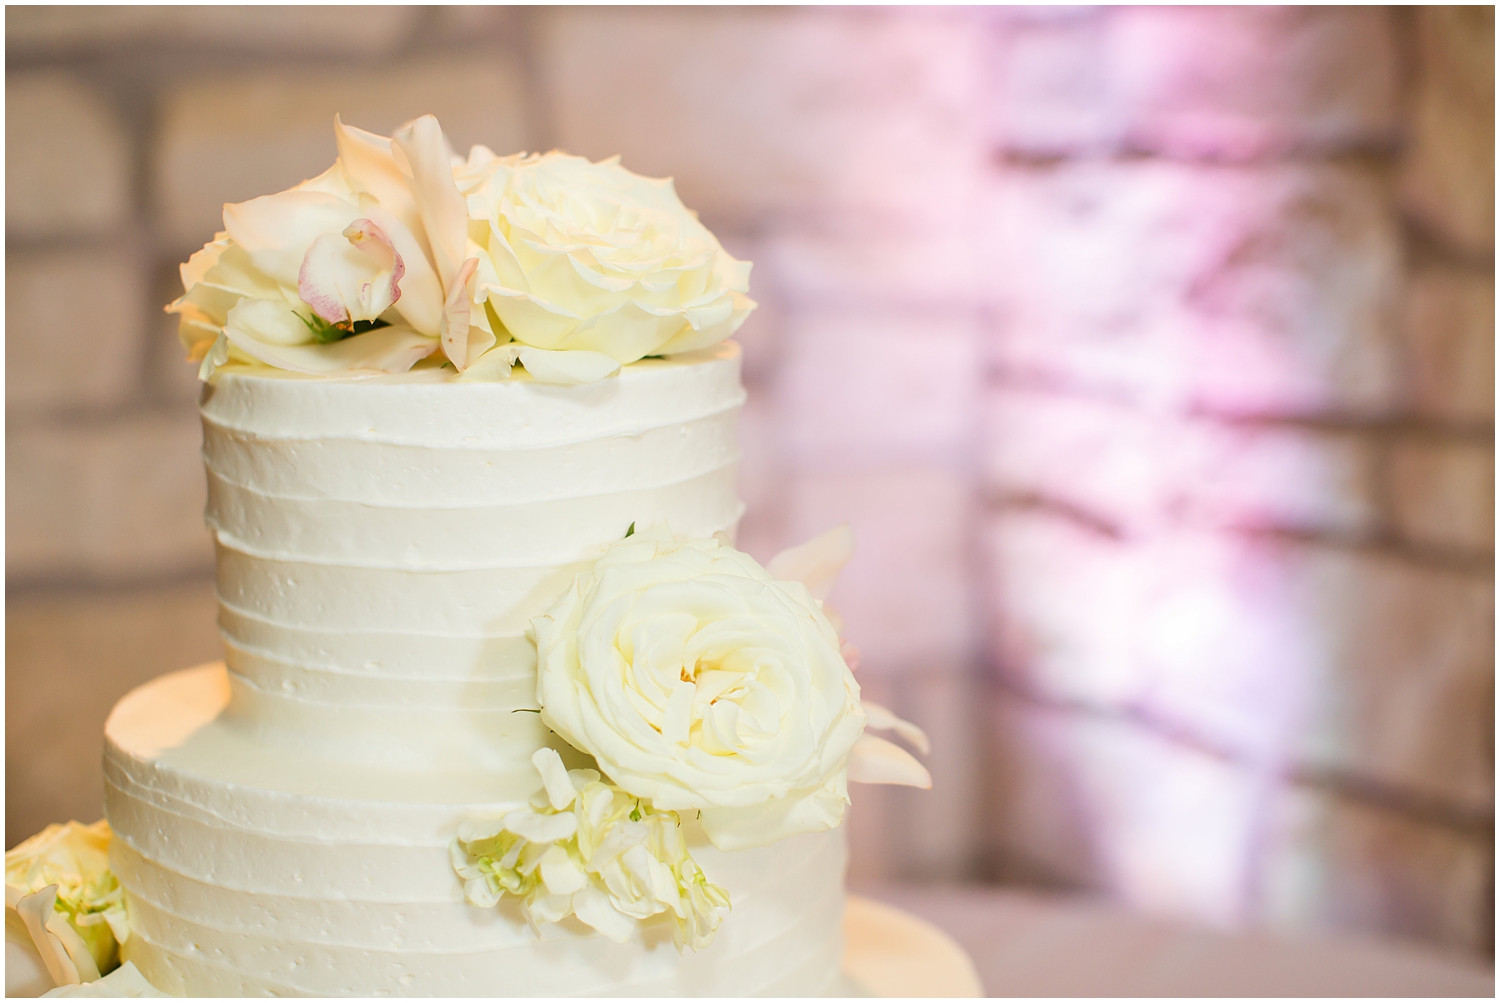 four tier white wedding cake with frosting texture and white roses and hydrangeas for wedding day reception